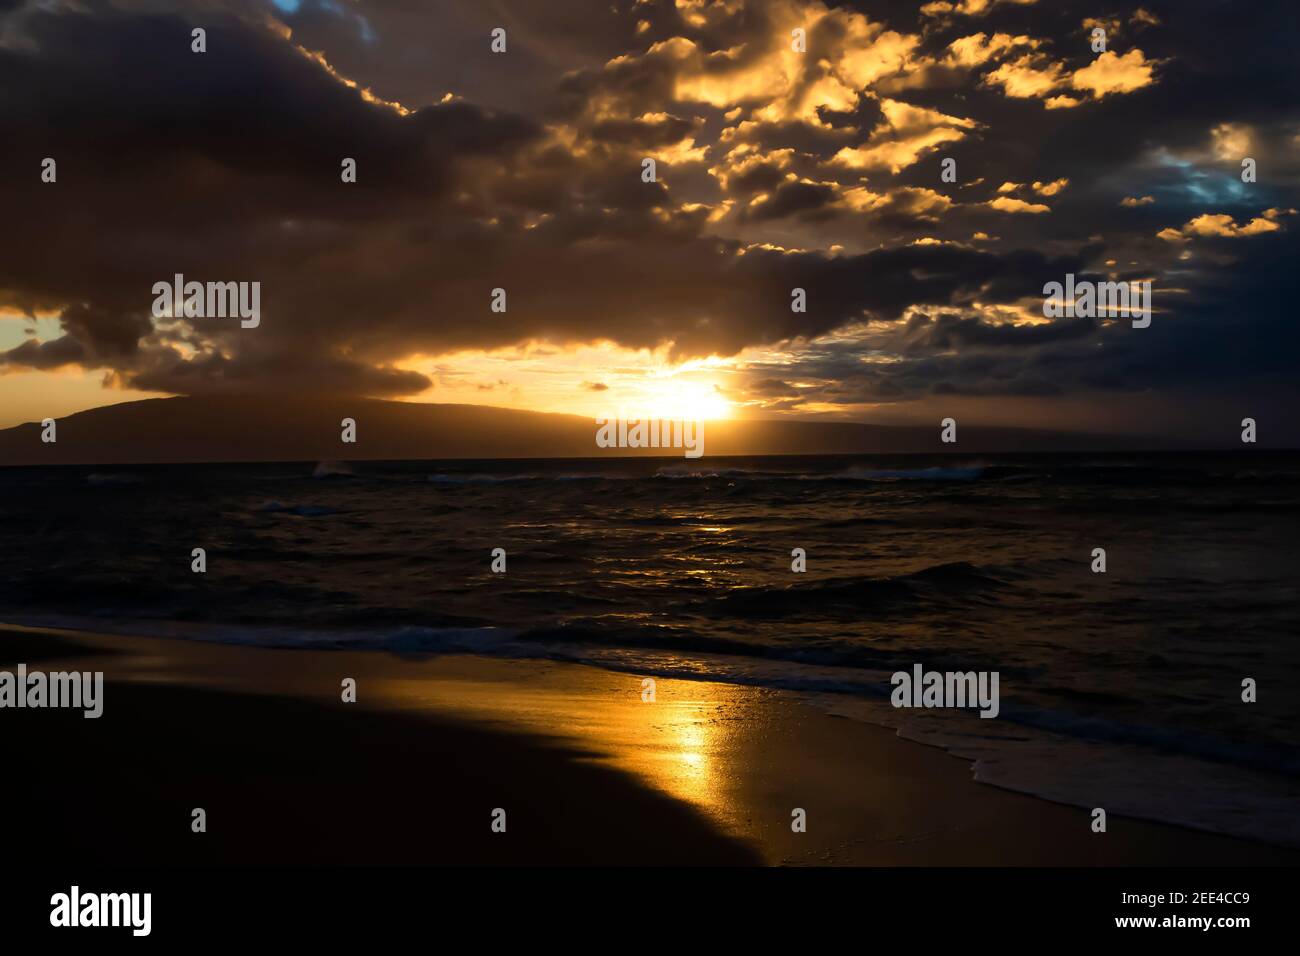 Sunset reflected in wet sand on beach in twilight seascape in Hawaii. Stock Photo